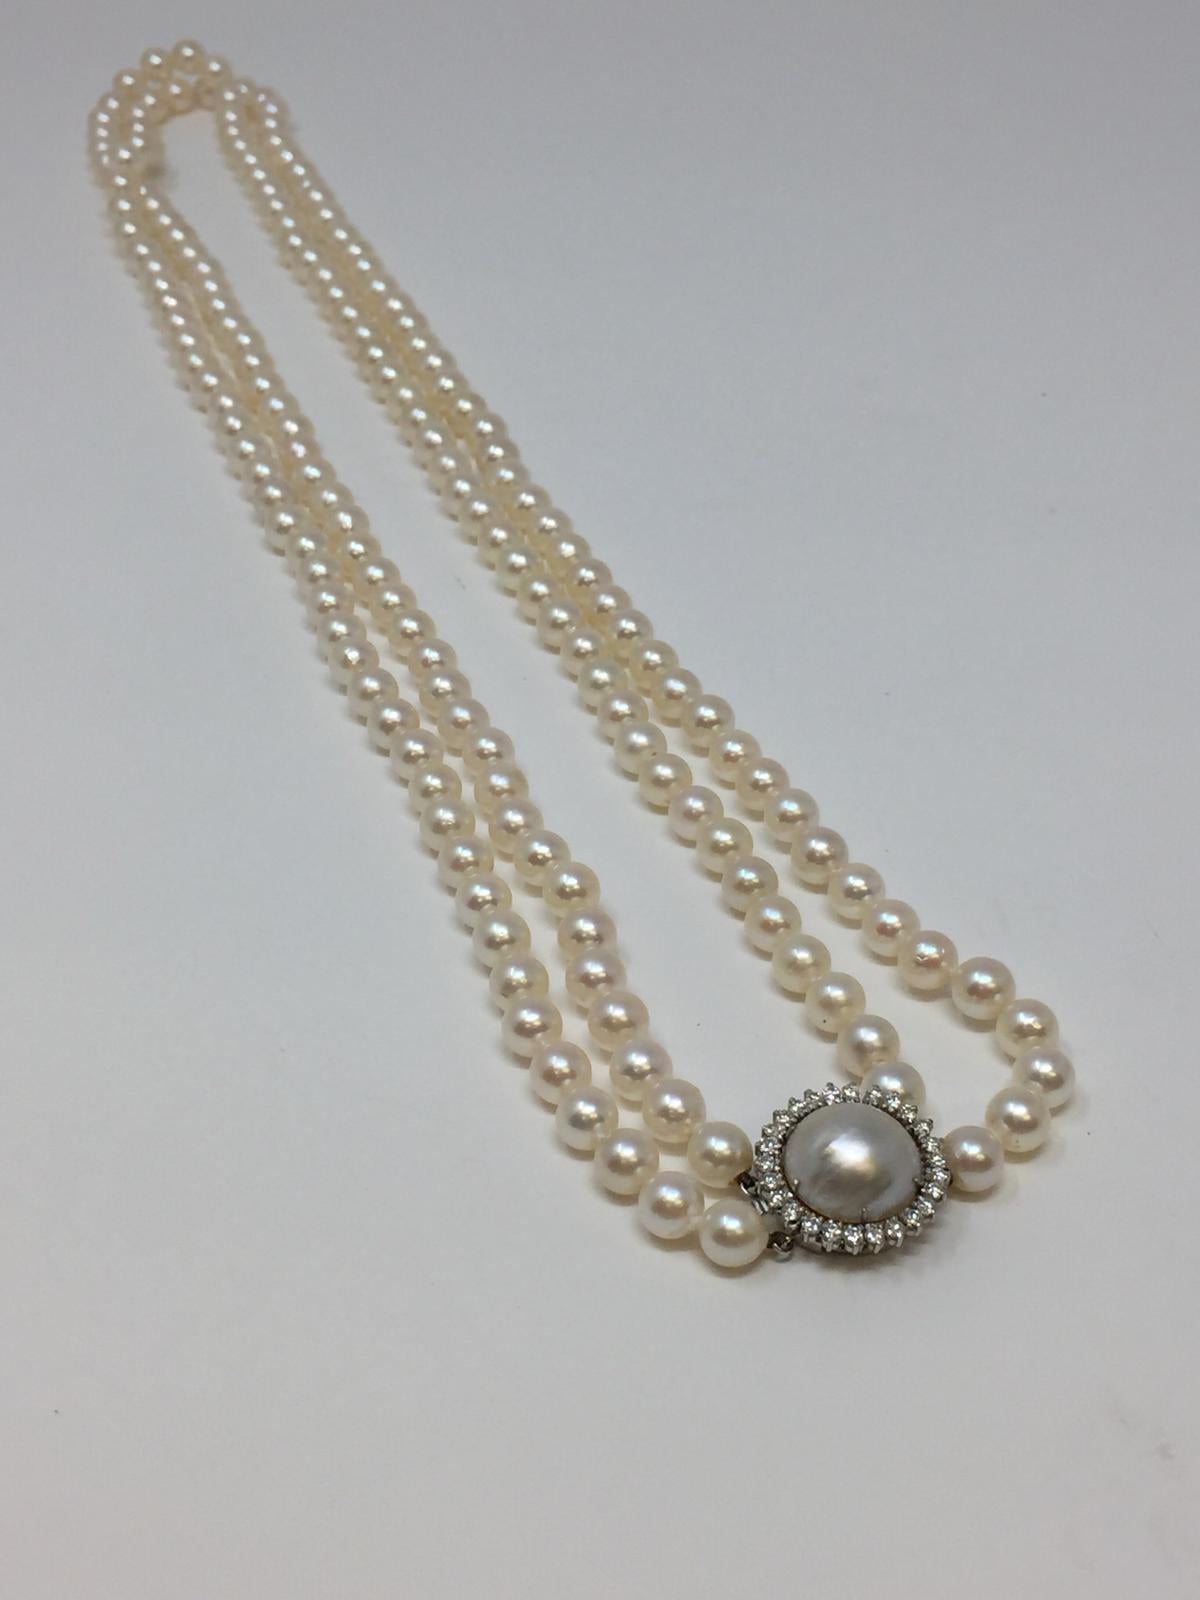 Round Cut Japanese Cultured Double Strand Pearl with 14 Karat Diamond and Moby Pearl Clasp For Sale